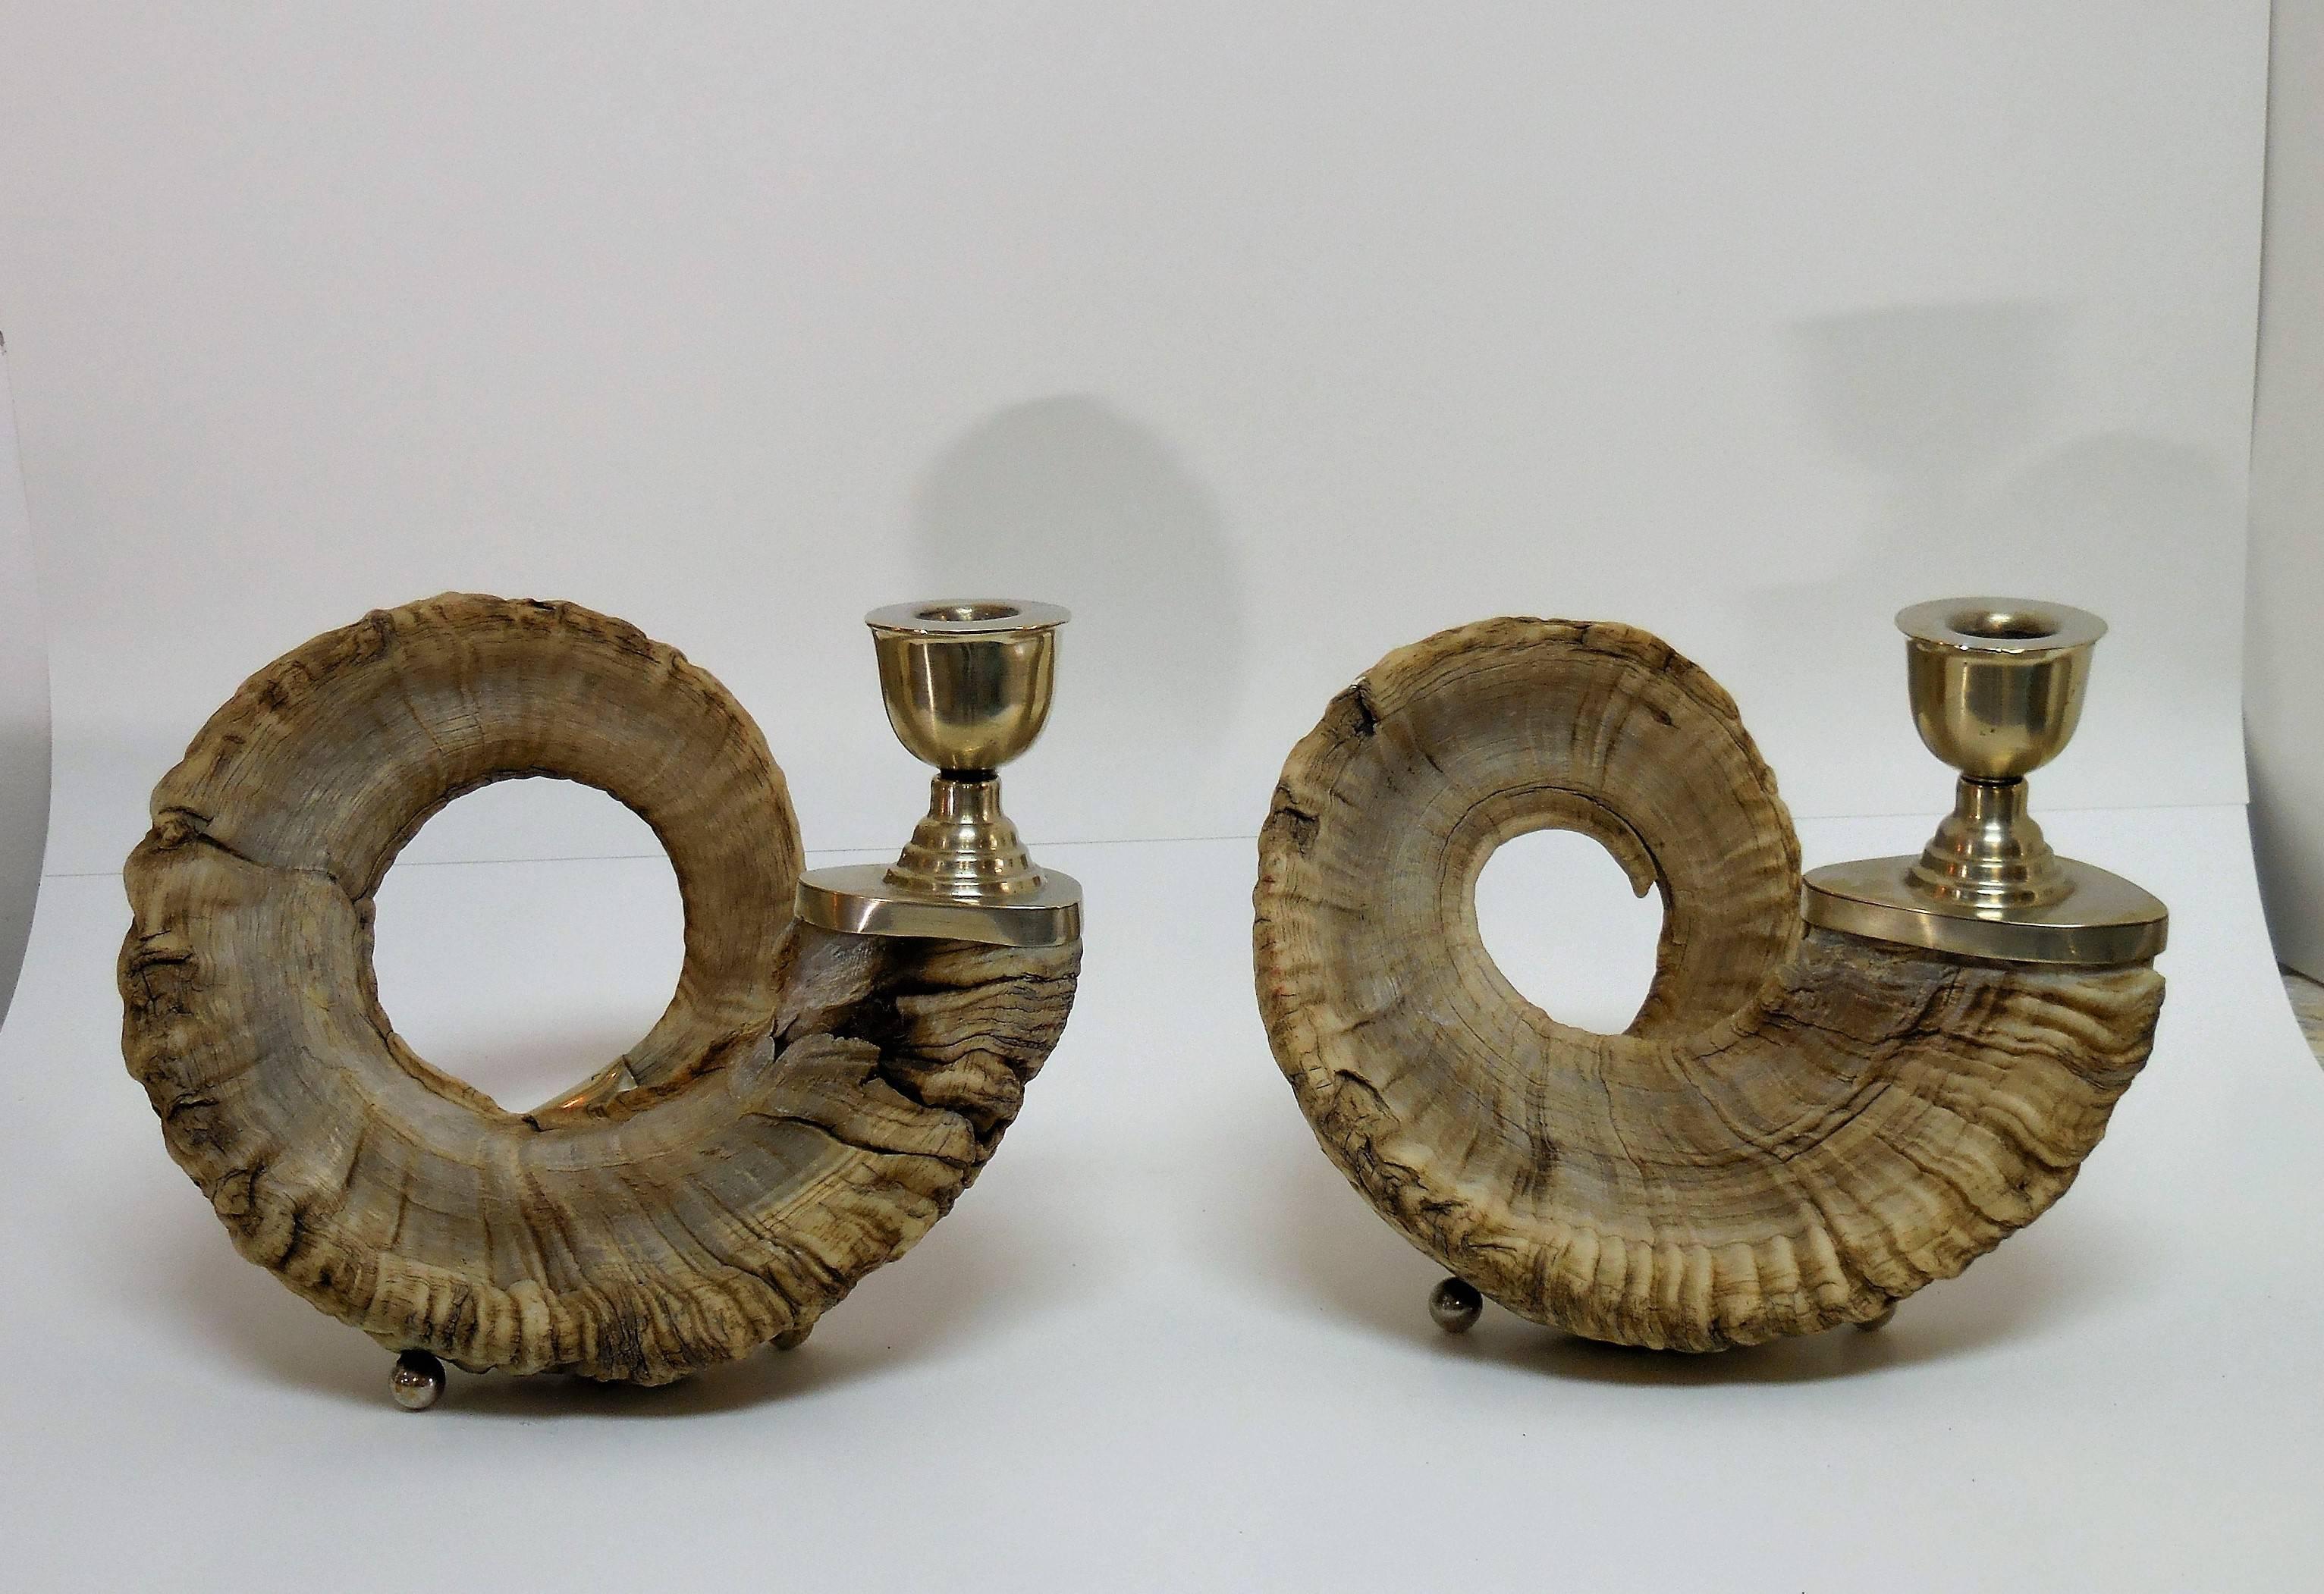 A pair of real horns with silver plated bronze appointments. Superb quality and very chic.